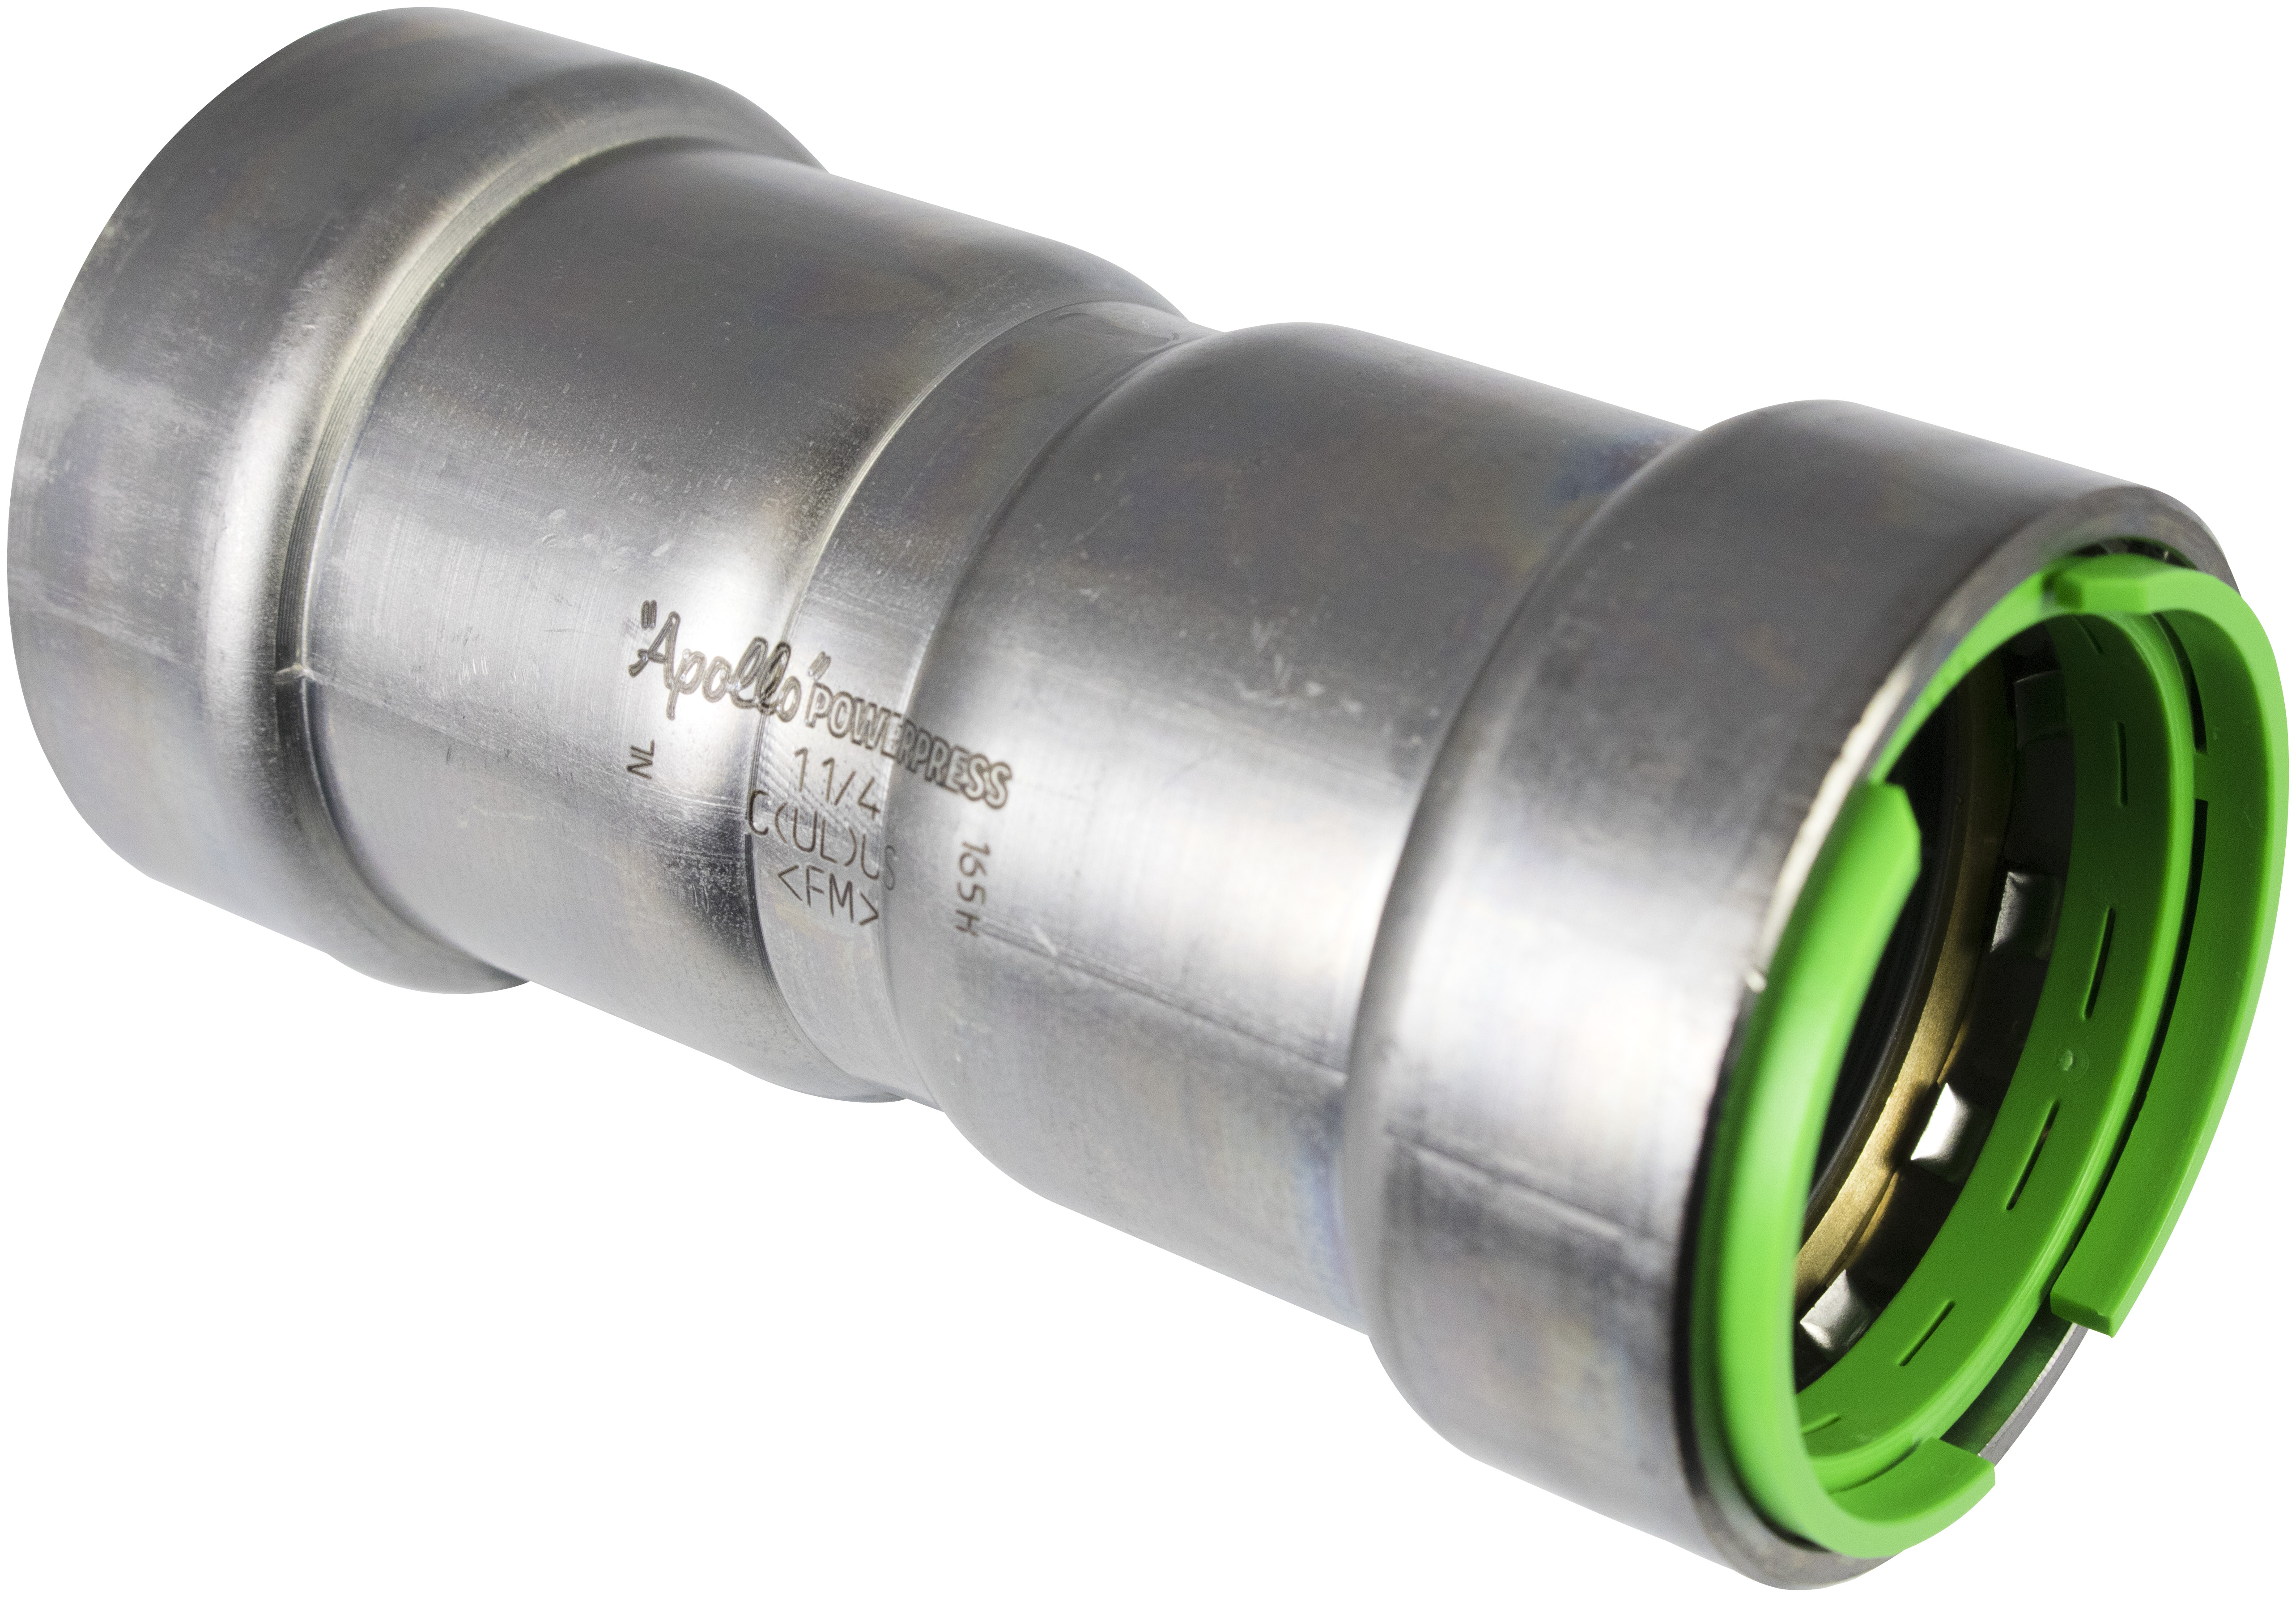 1 APOLLO POWERPRESS COUPLING - WITH STOP -  P X P -  1 -  CARBON STEEL (ZNNI COATED) -  EPDM SEALING ELEMENT -  VISUAL CONTROL RING TECHNOLOGY (GREEN) -  MODEL NO. 400